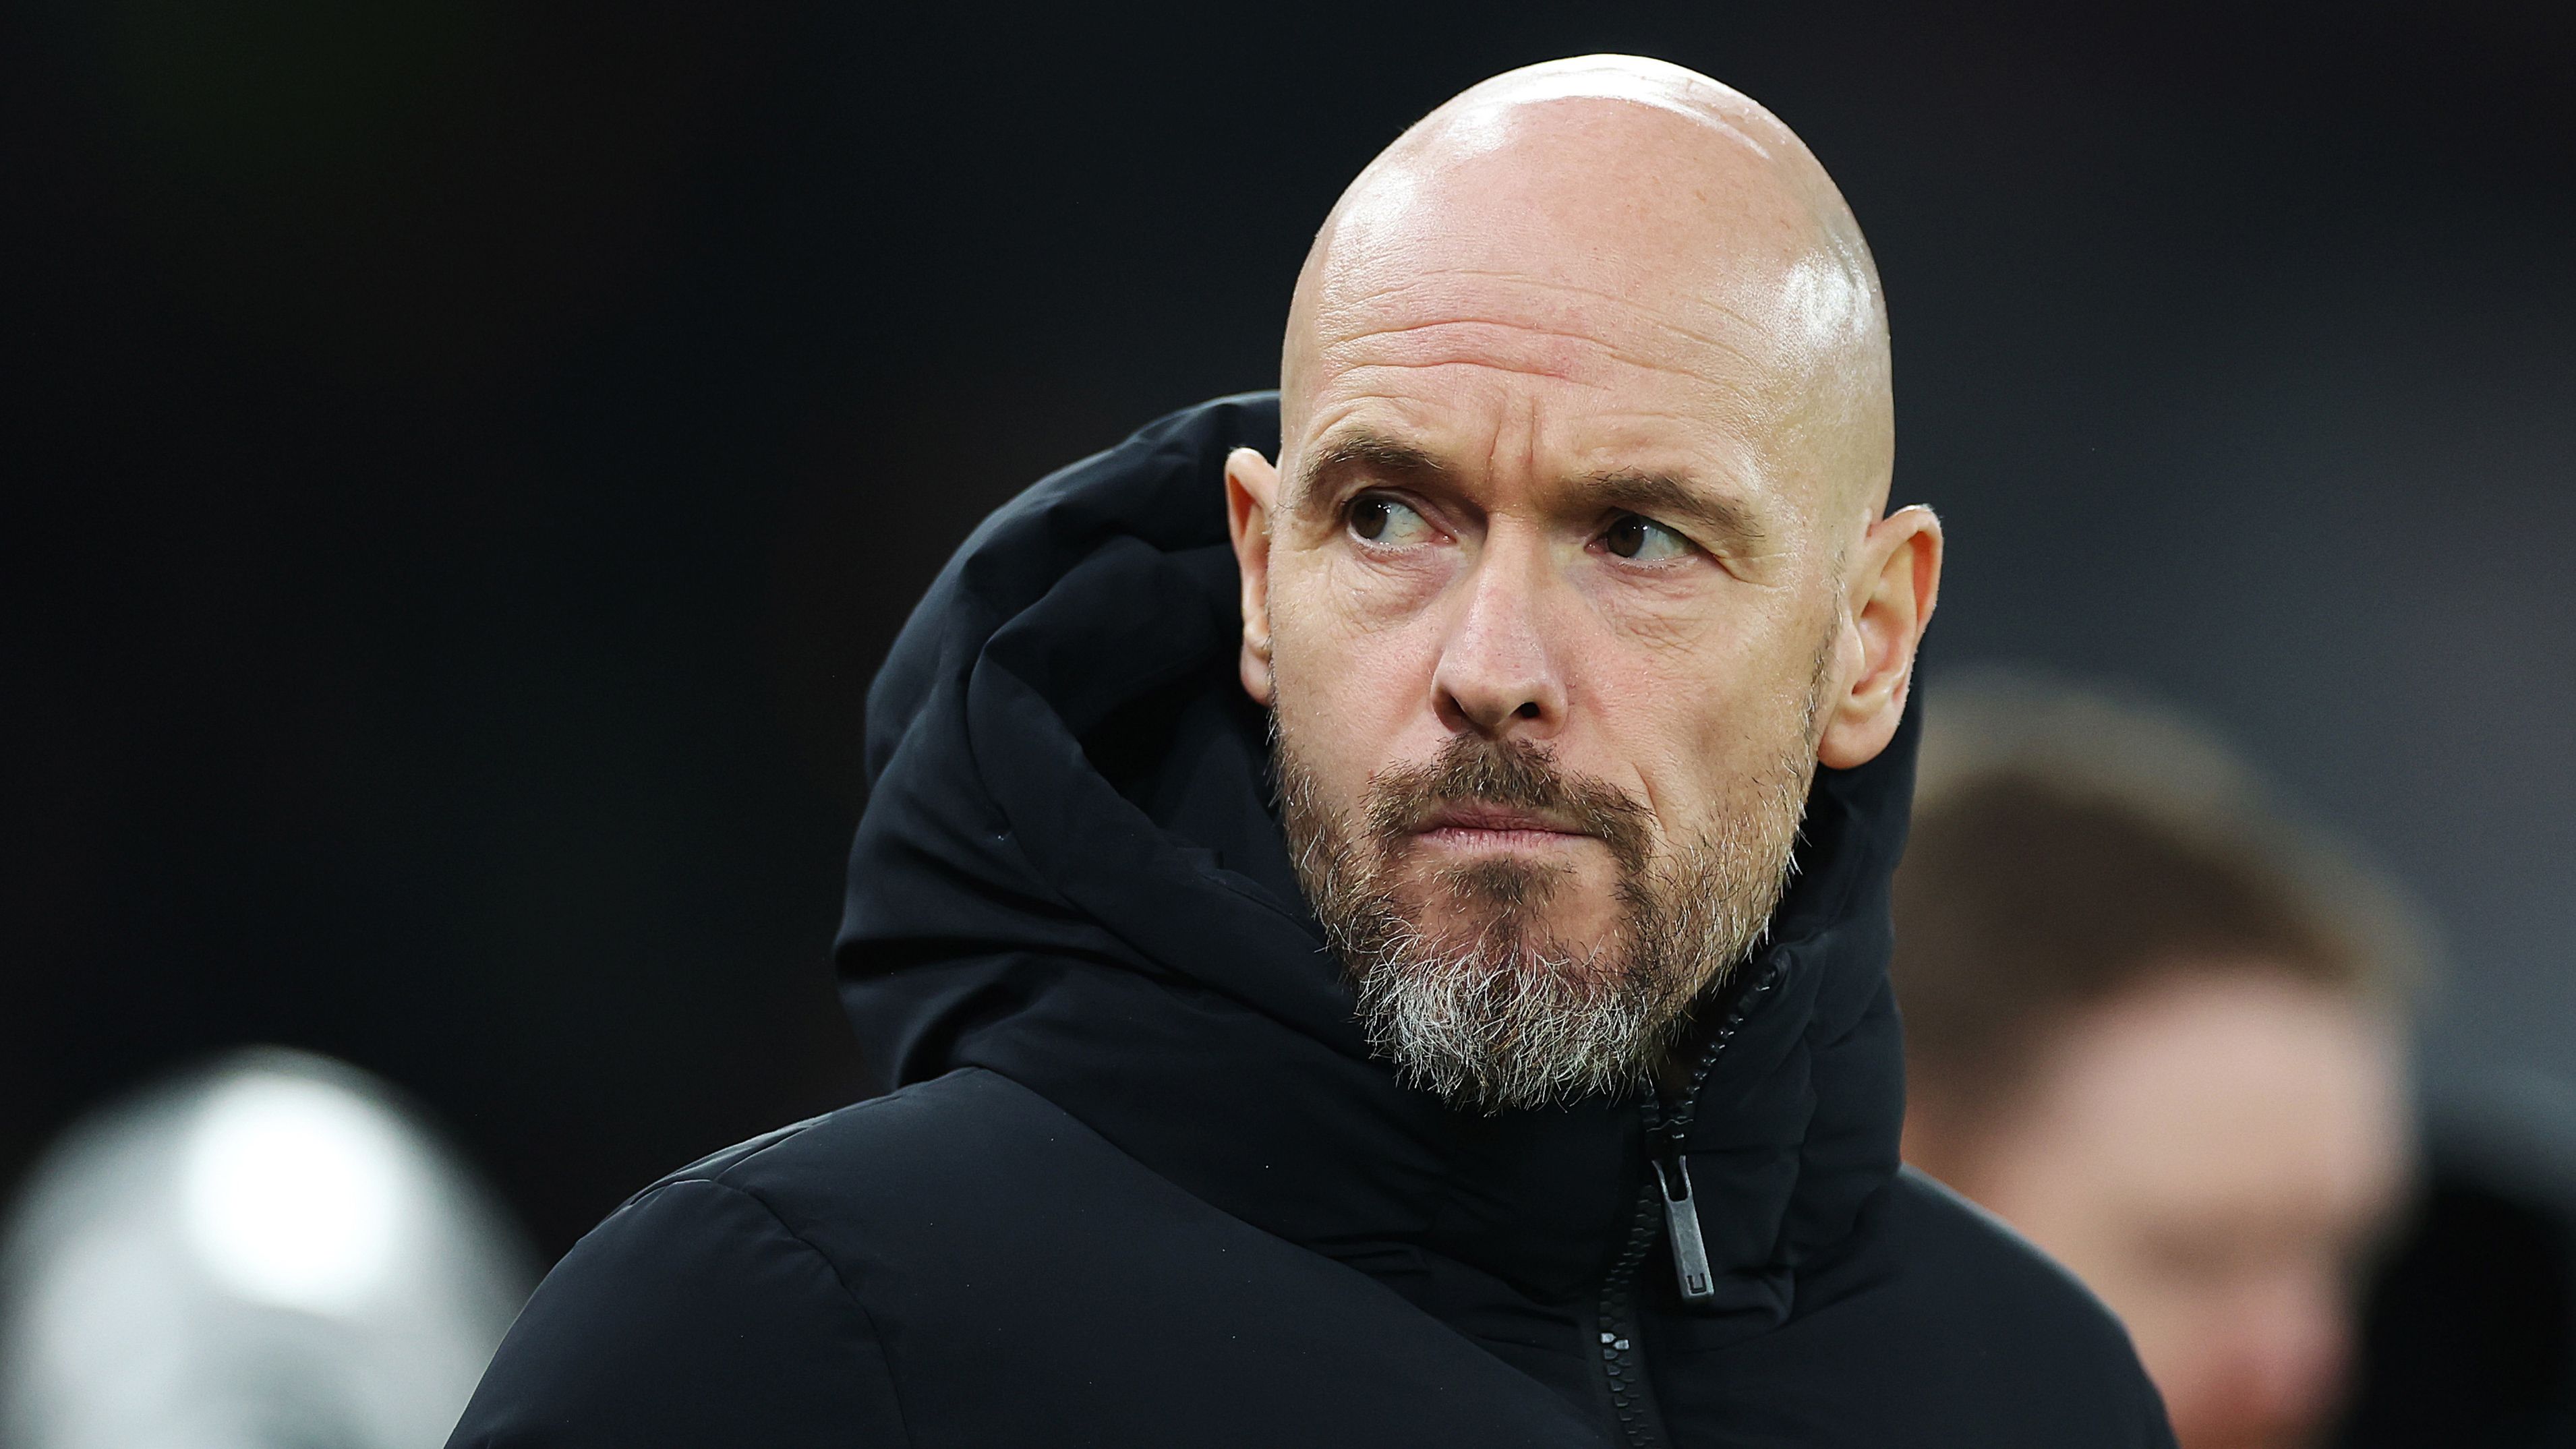 Tipping point looms for besieged Manchester United coach Erik ten Hag after Champions League debacle